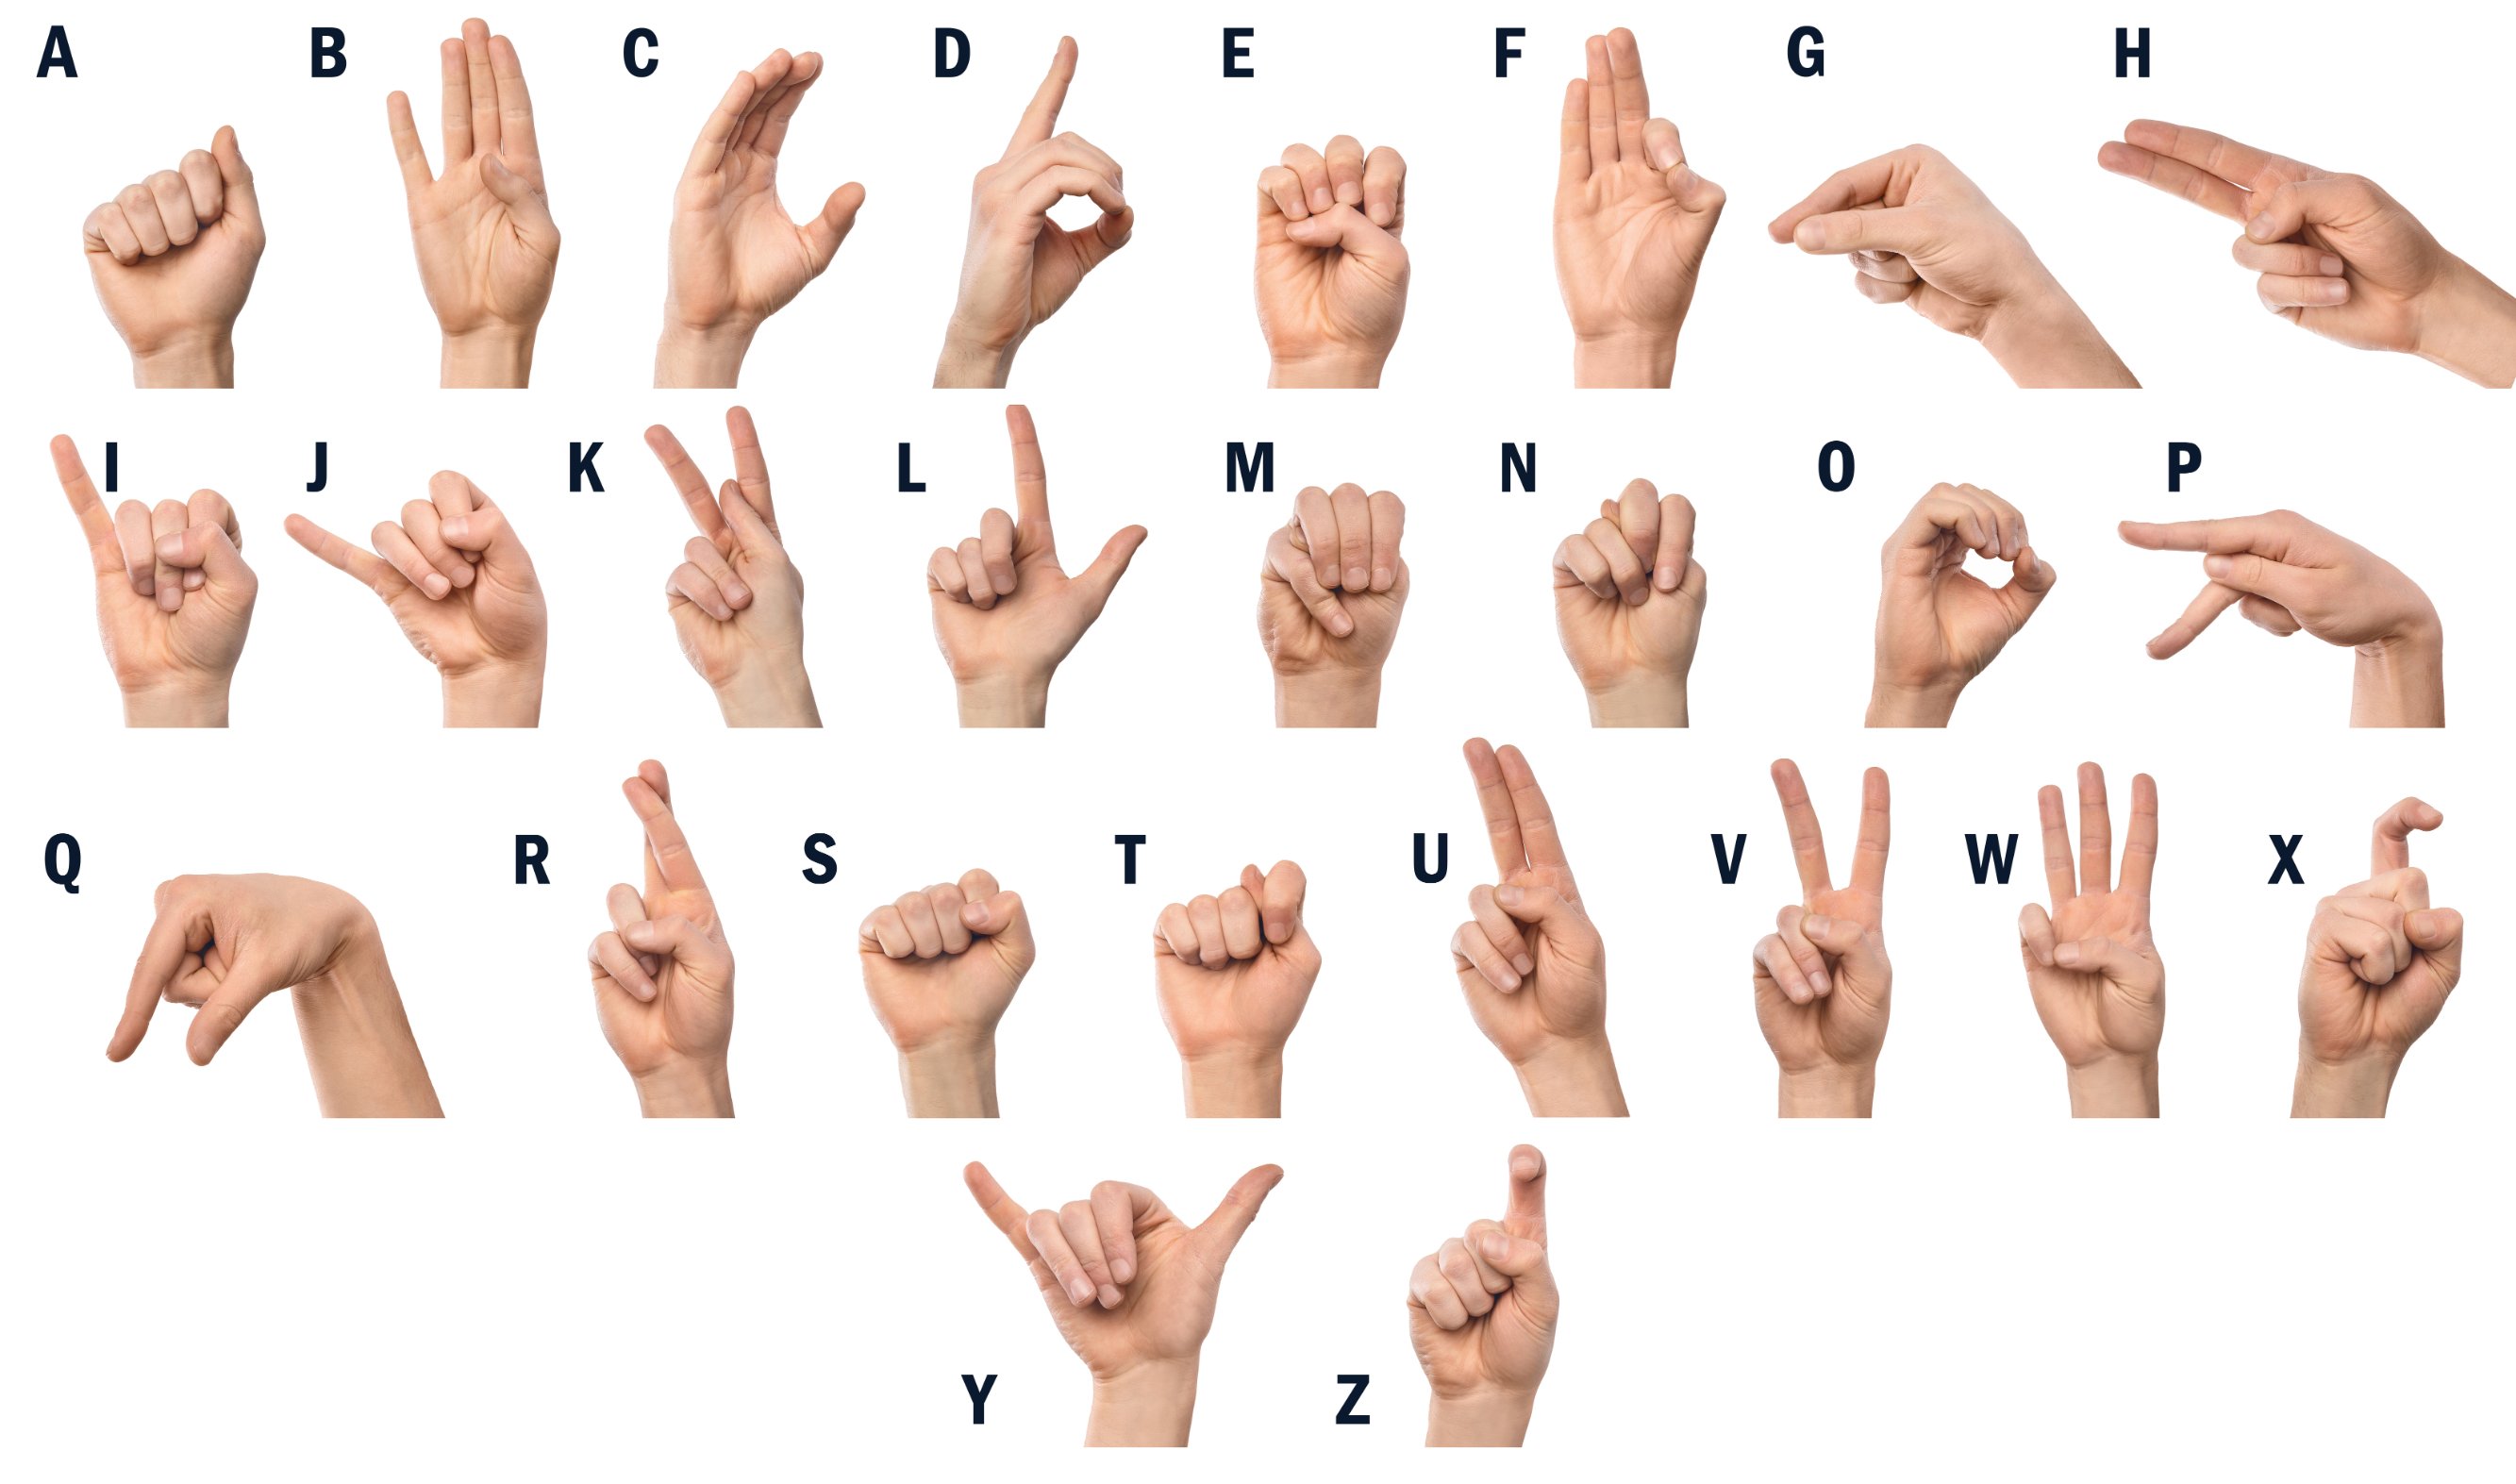 Does It Take Long To Learn Sign Language